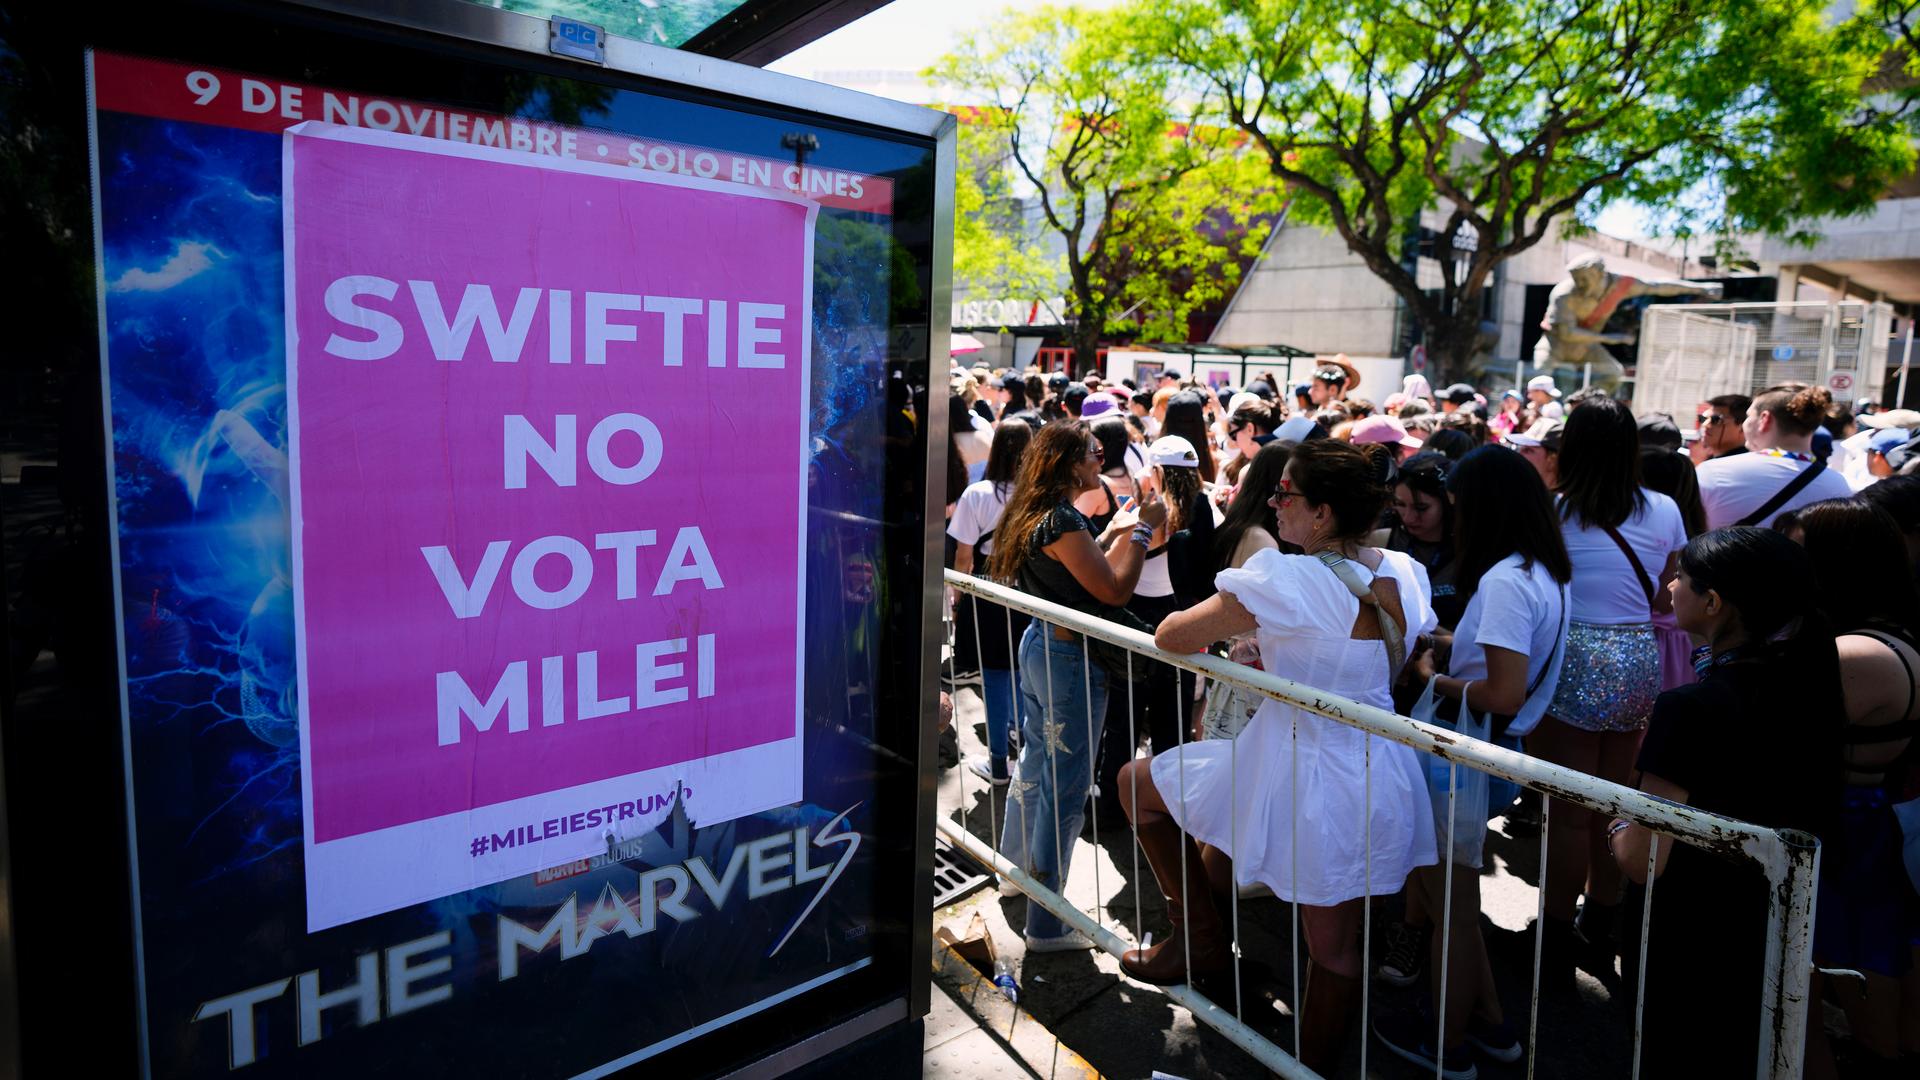 A pink sign in the forefront of a largely female crowd that reads in Spanish "Swiftie No Vota Milei"